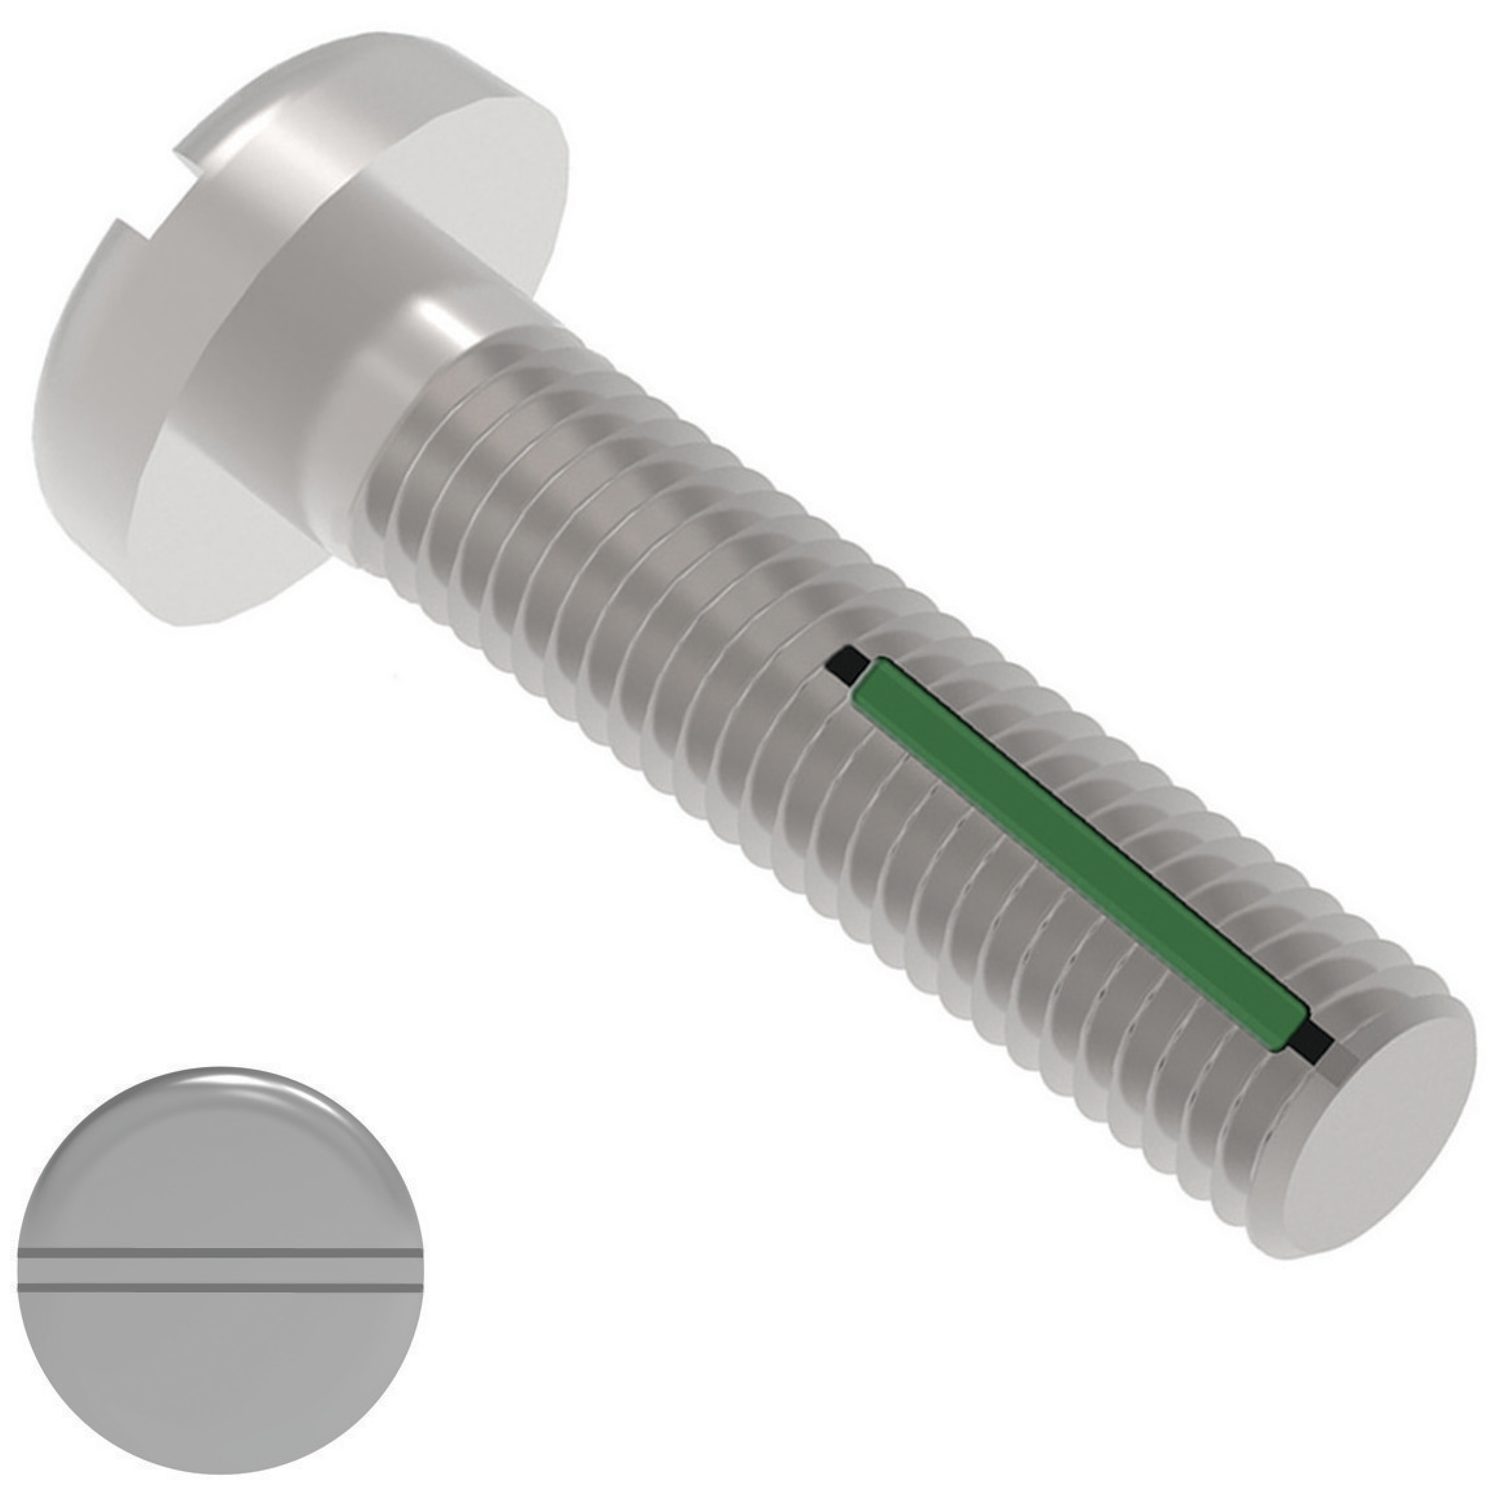 Self-Locking Pan Head Screws Surface finishes such as cadium plating, nickel plating, armalloy coating, black oxide coating - all available on request.